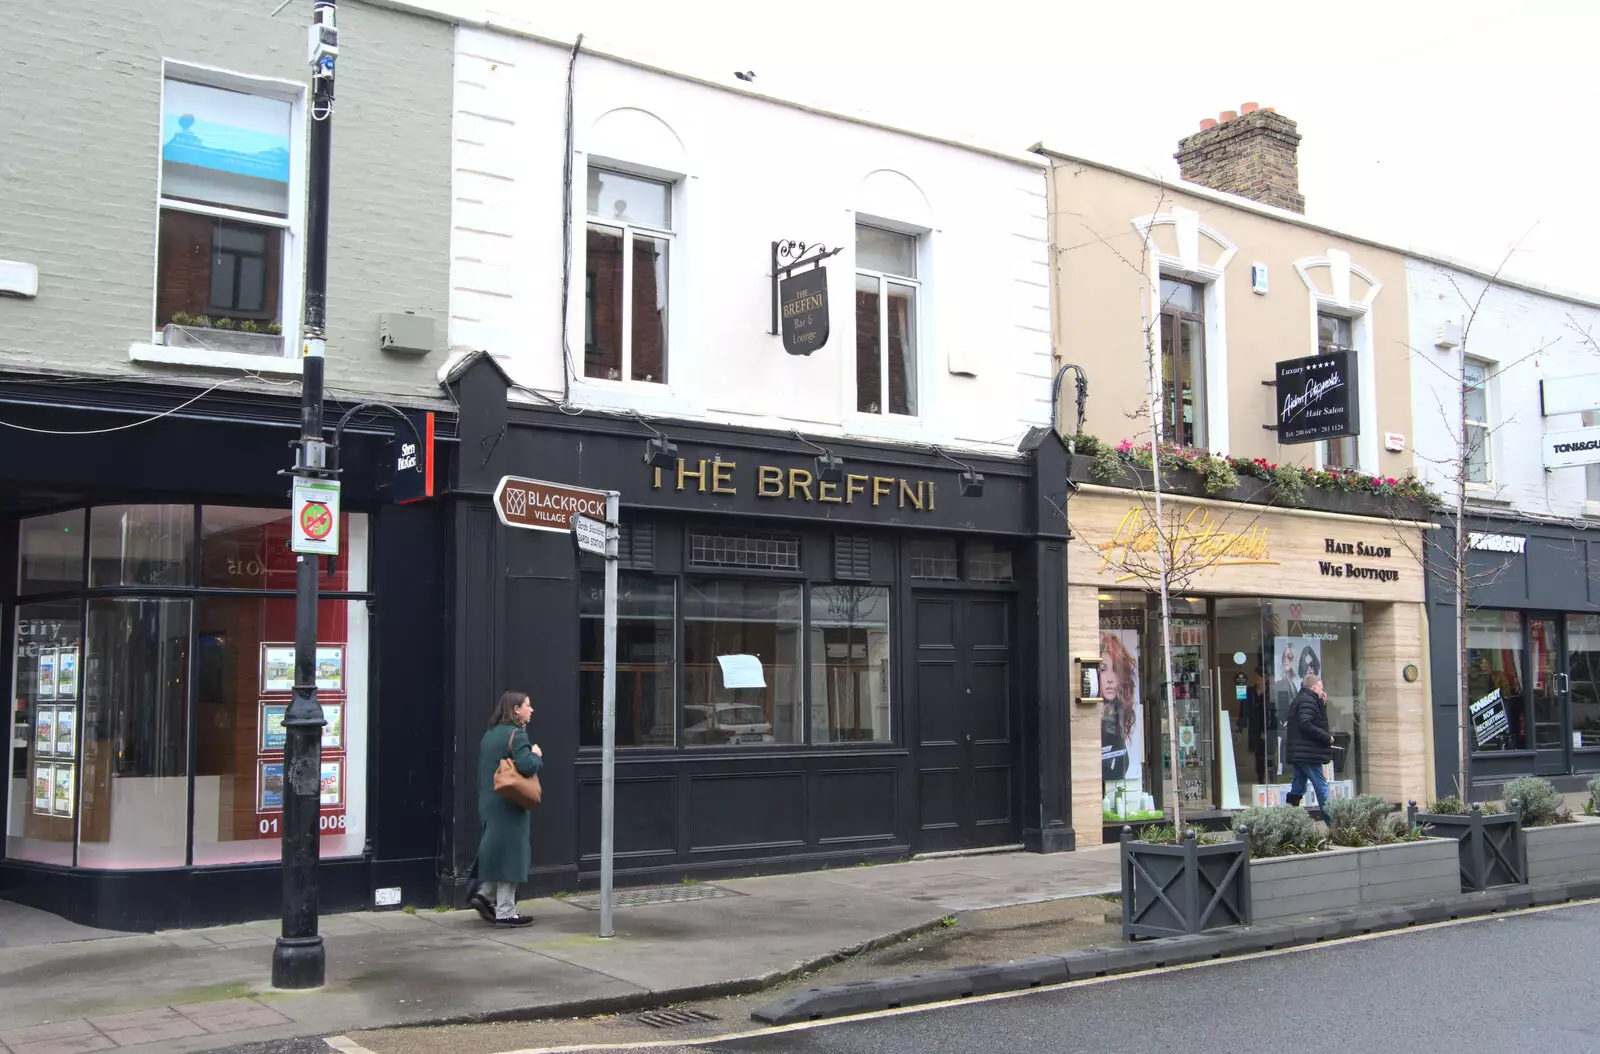 Another look at the Breffni, from The End of the Breffni, Blackrock, Dublin - 18th February 2023